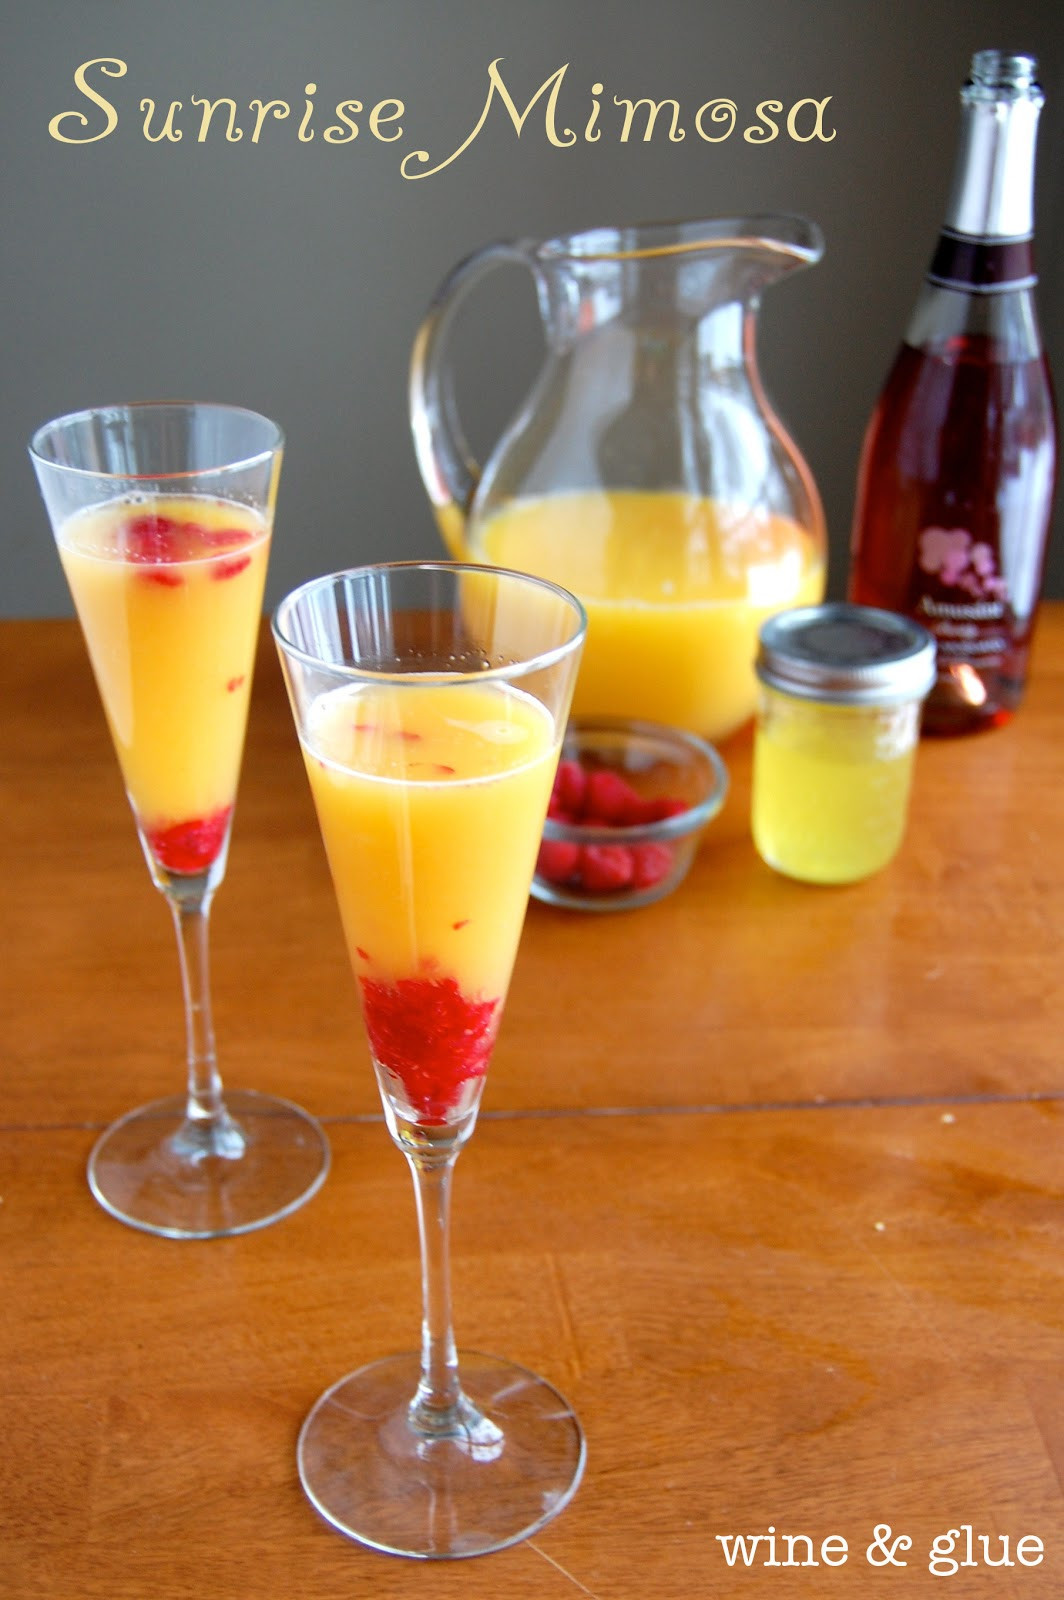 Champagne Drinks For Brunch
 The 30 Best Ideas for Champagne Drinks for Brunch Best